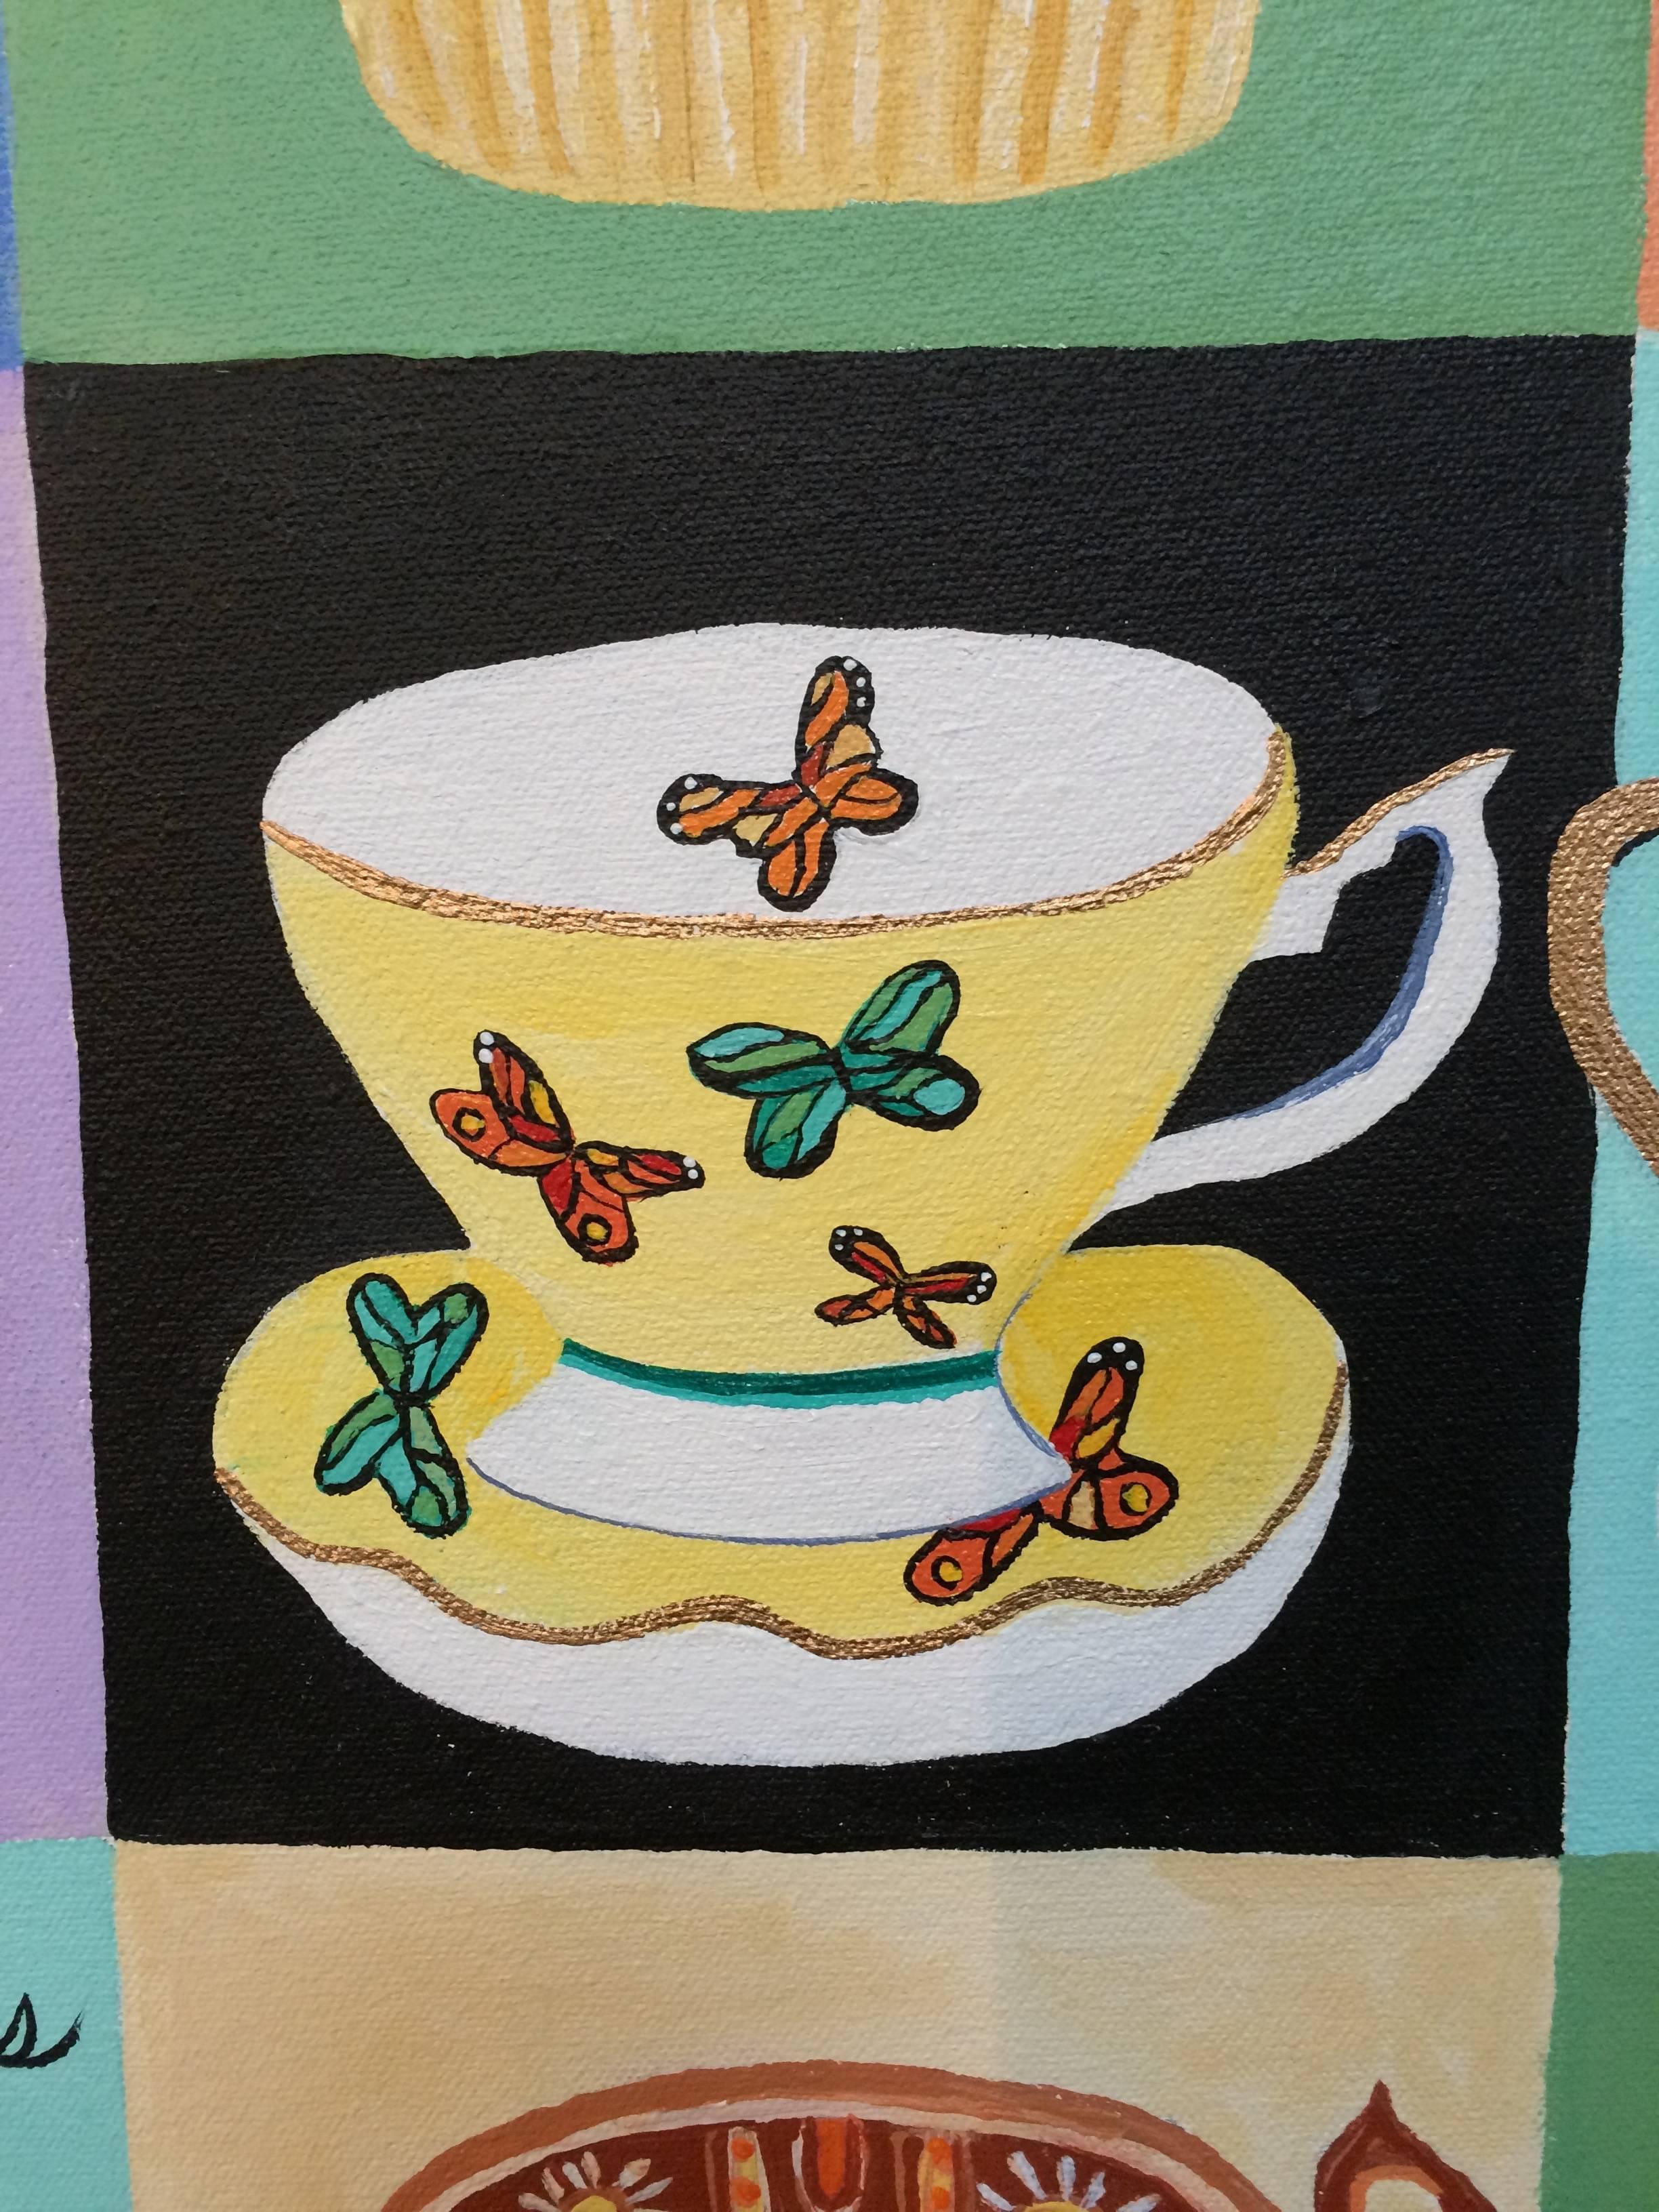 A delightful hand embellished giclee or reproduction on canvas having a whimsical collection of ice cream colored cupcakes and teacups with clever bits of dictionary definitions and text. Artist added impasto and details and signature. Finished on